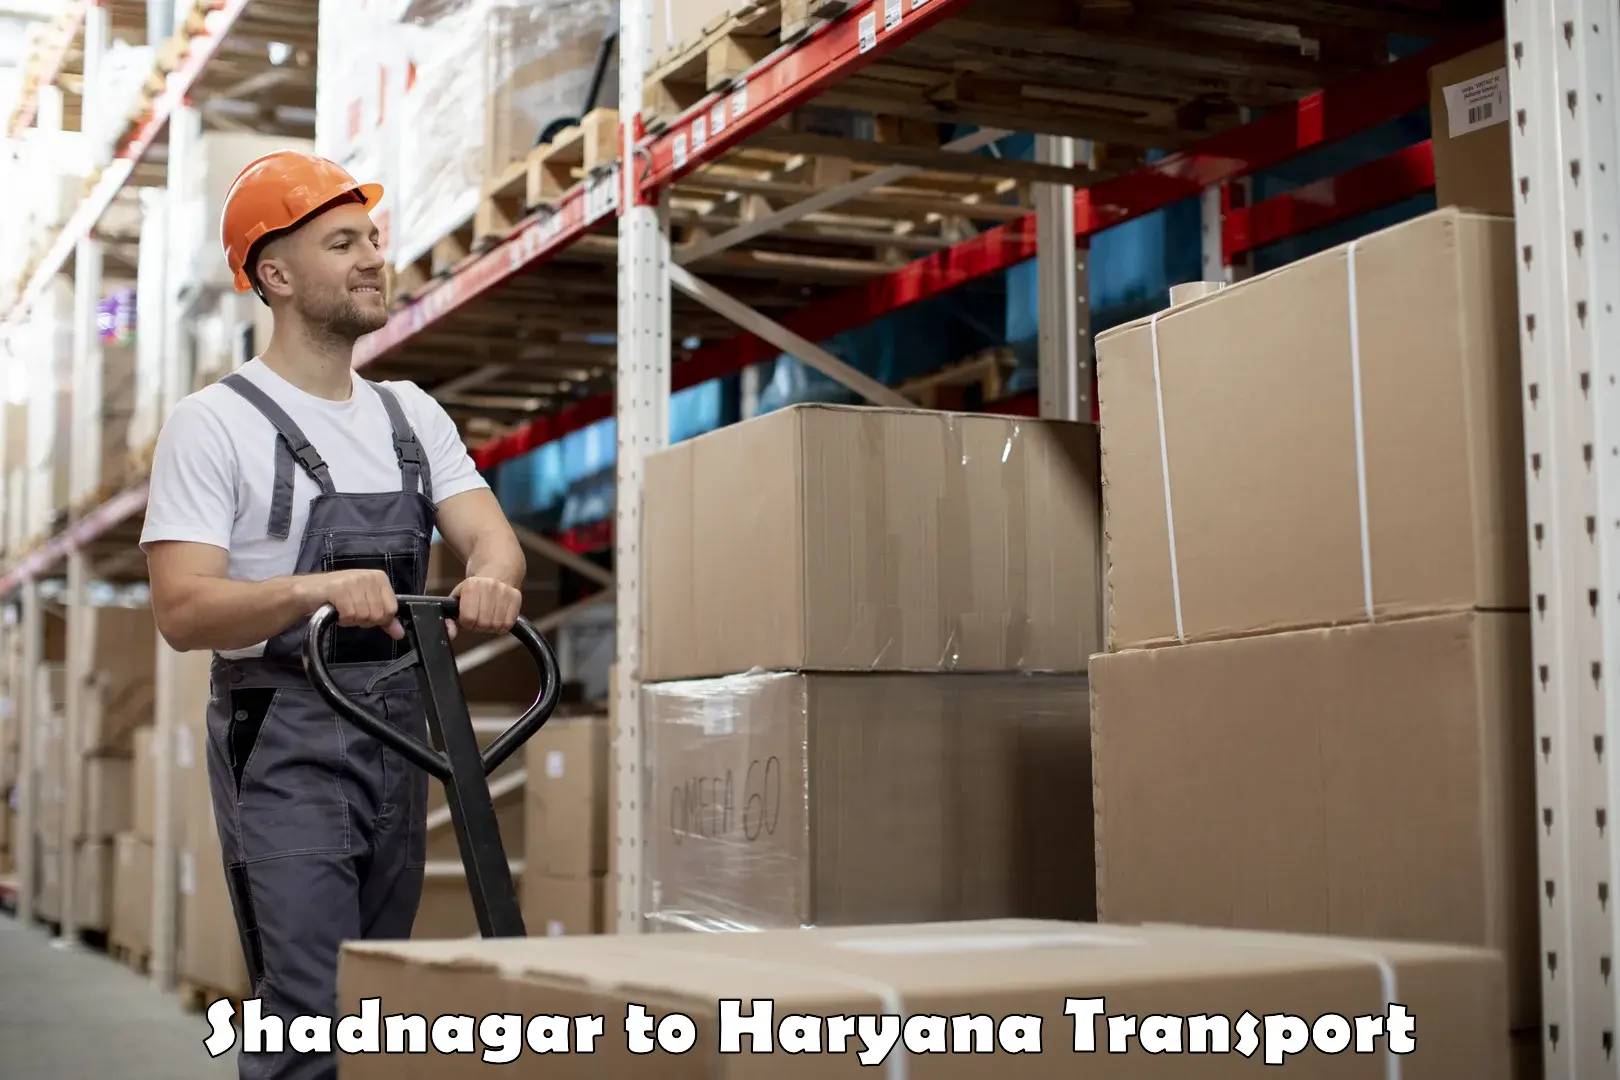 Container transport service Shadnagar to NCR Haryana